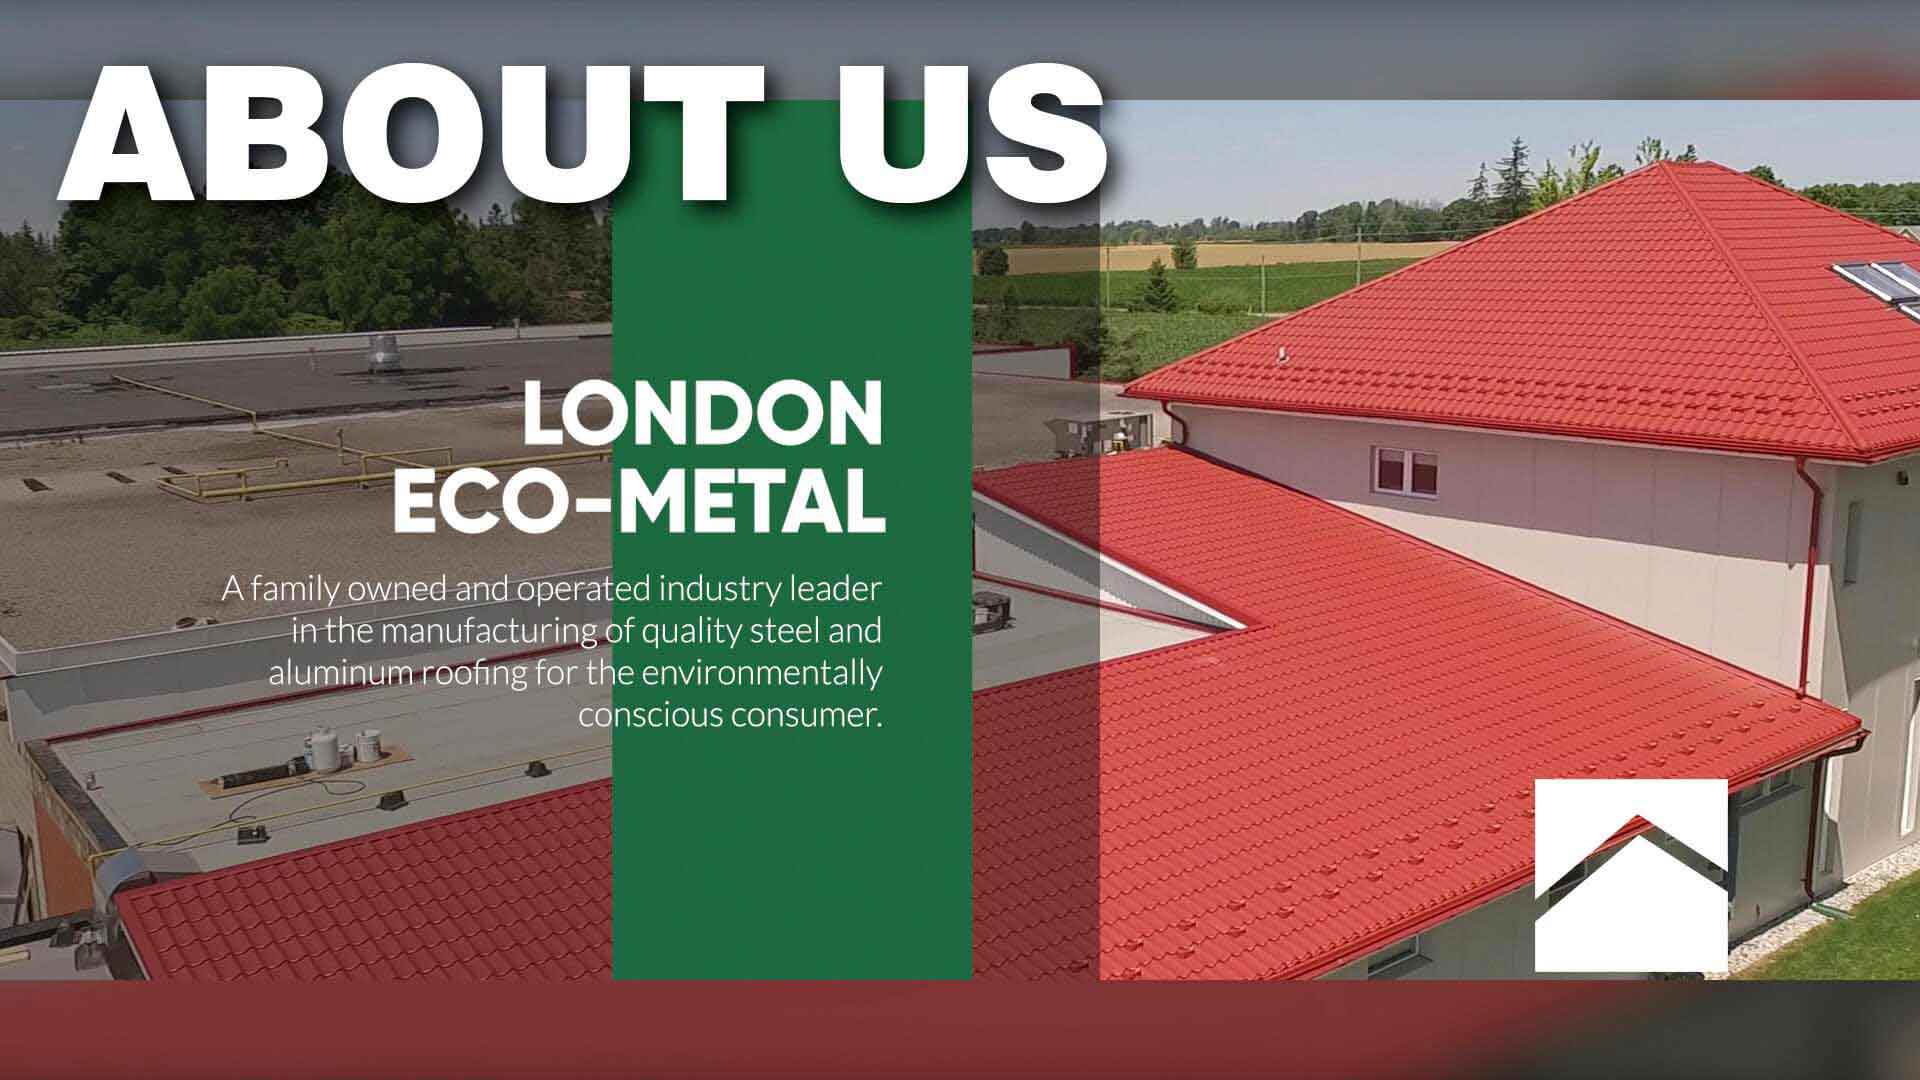 About London Eco-Metal